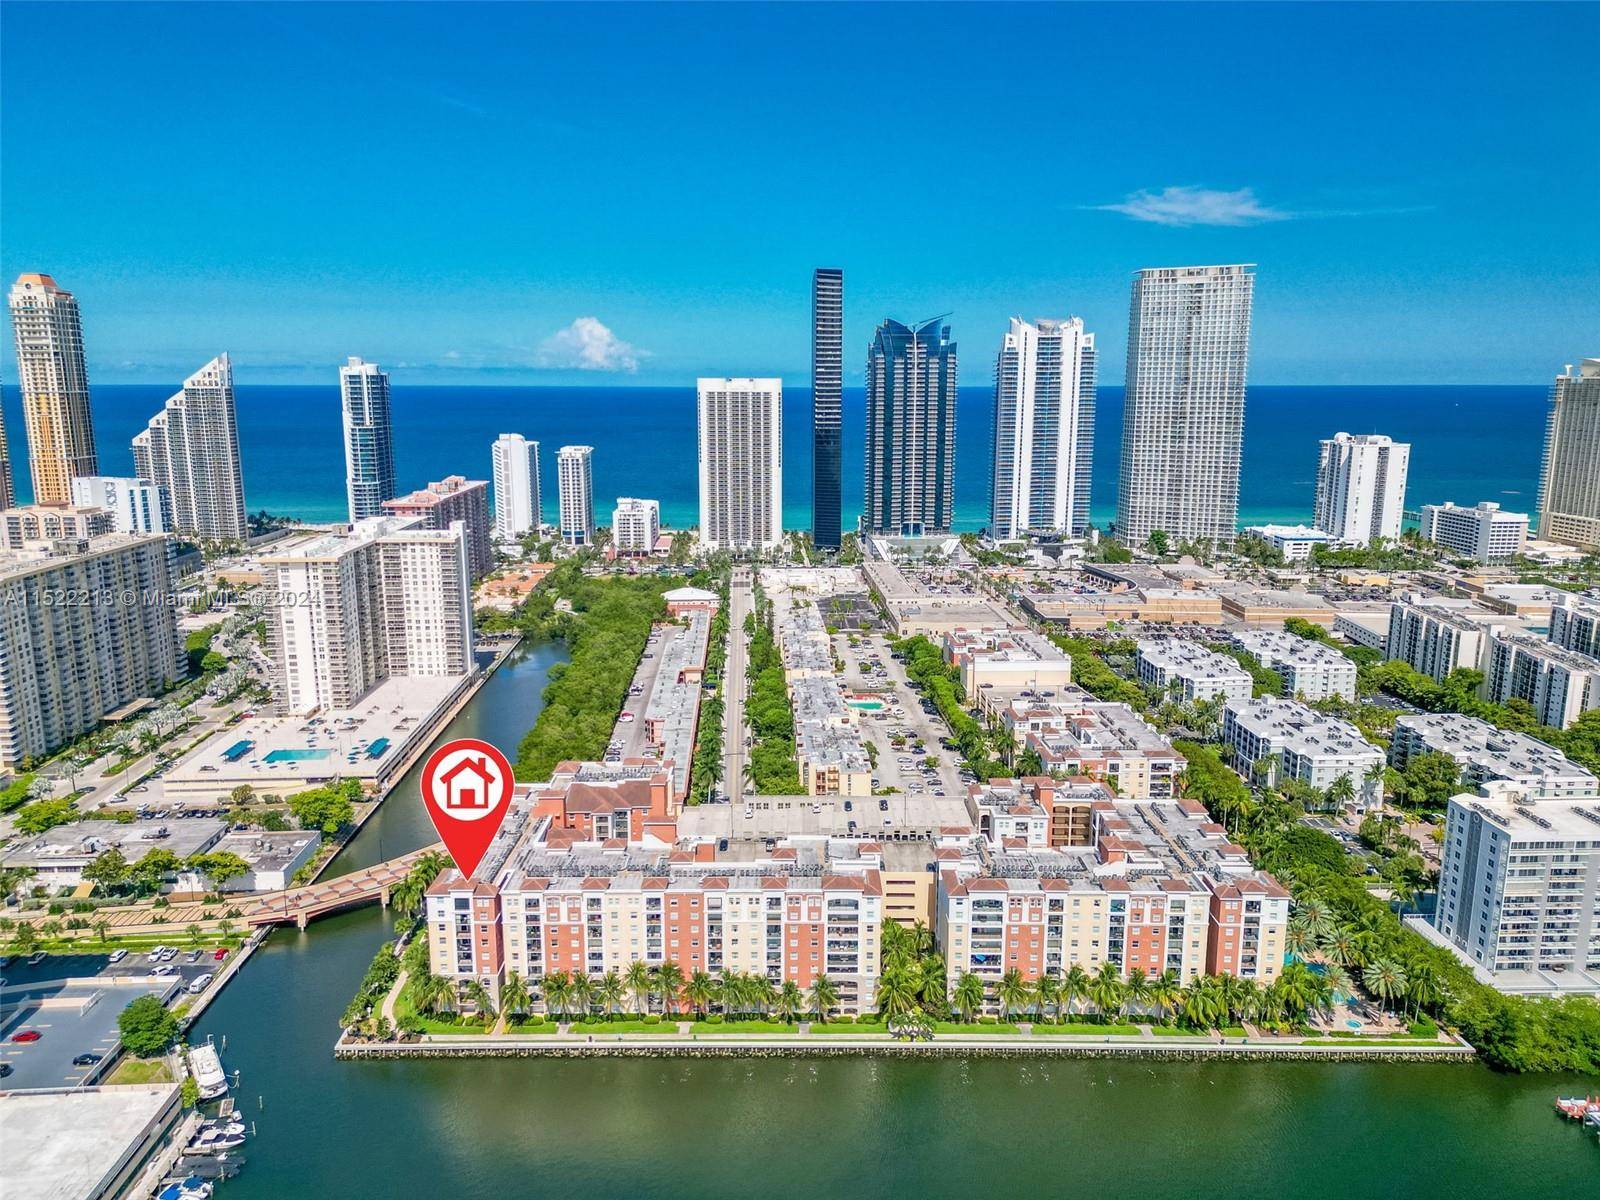 Medditerian style Bayfront furnished condo, located just minutes walking distance to the beach, supermarkets and two biggest playgrounds of prestigious location of Sunny Isles.